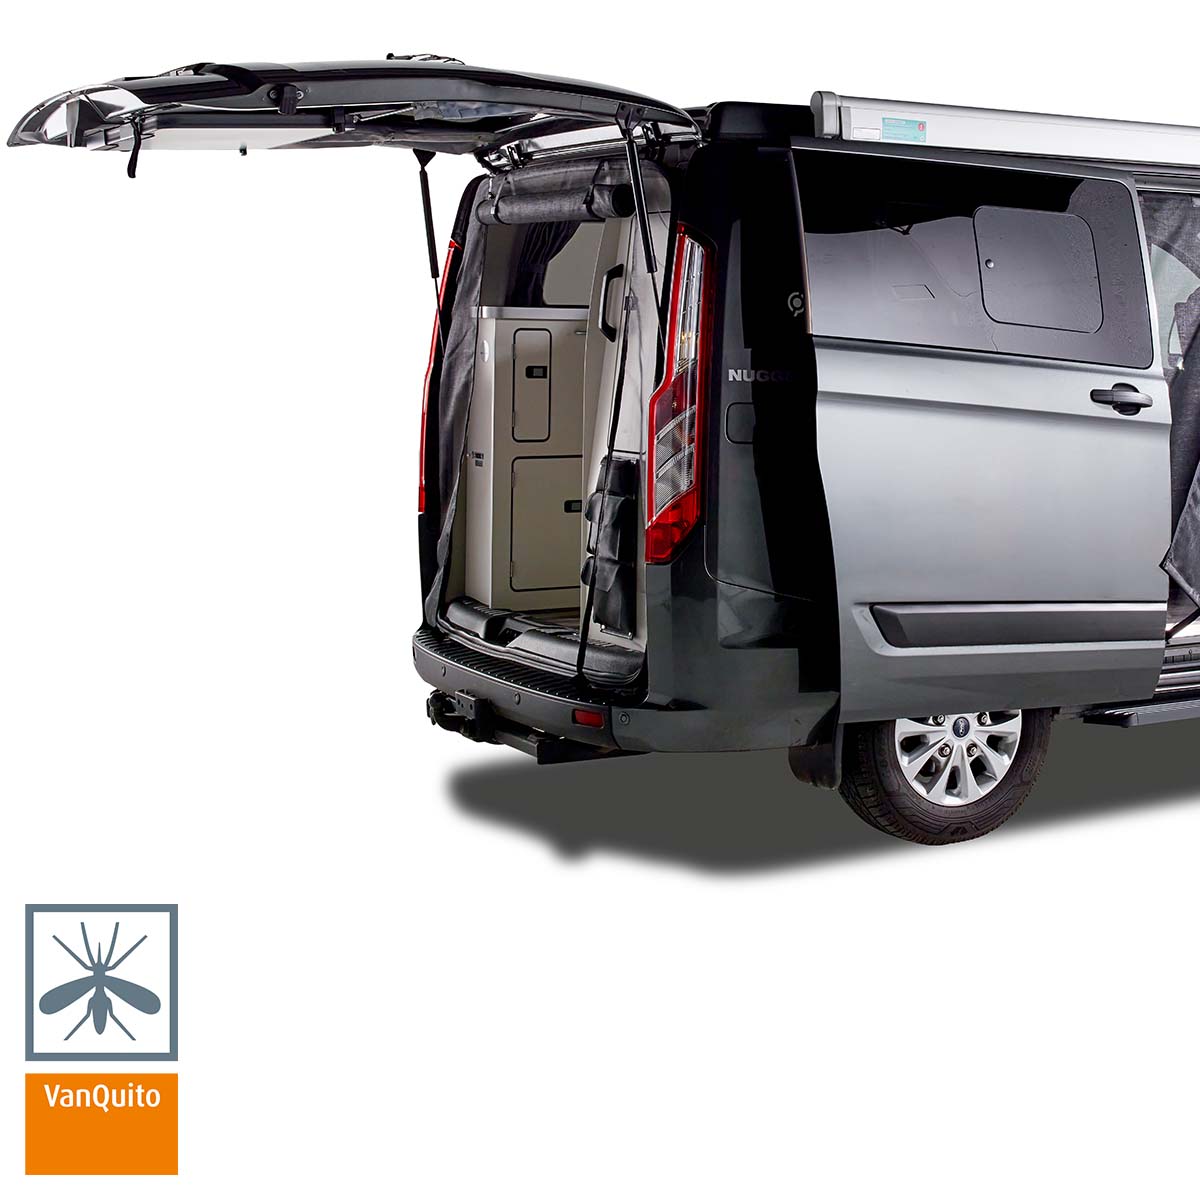 Mayr VanQuito Set für VW T5/T6 feinmaschiges Moskitonetz - Camping Wagner  Edition bei Camping Wagner Campingzubehör